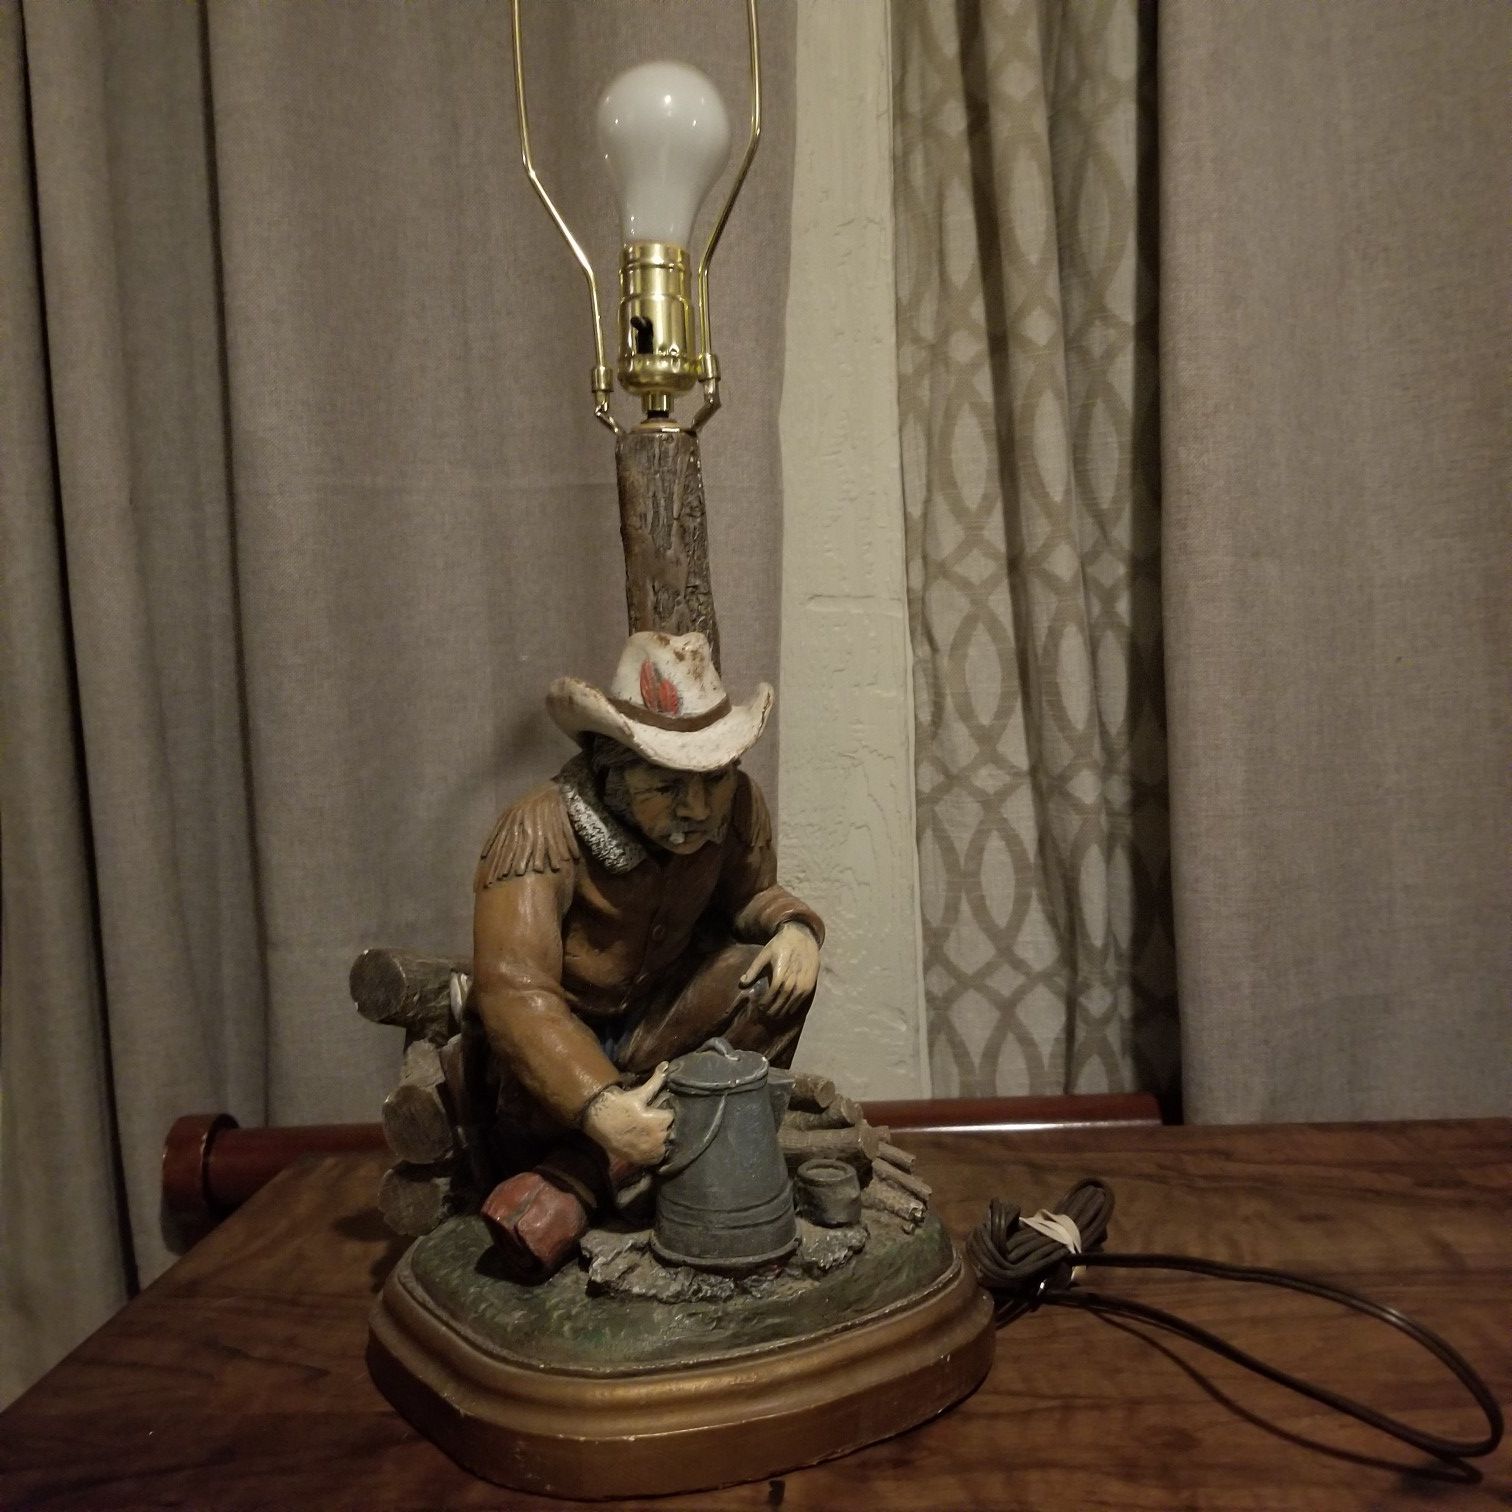 ARSIT BROTHERS OF CALIFORNIA LAMP COWBOY CAMPFIRE THEMED 25" TALL x 9" Wide Base PERFECT UNIQUE GIFT